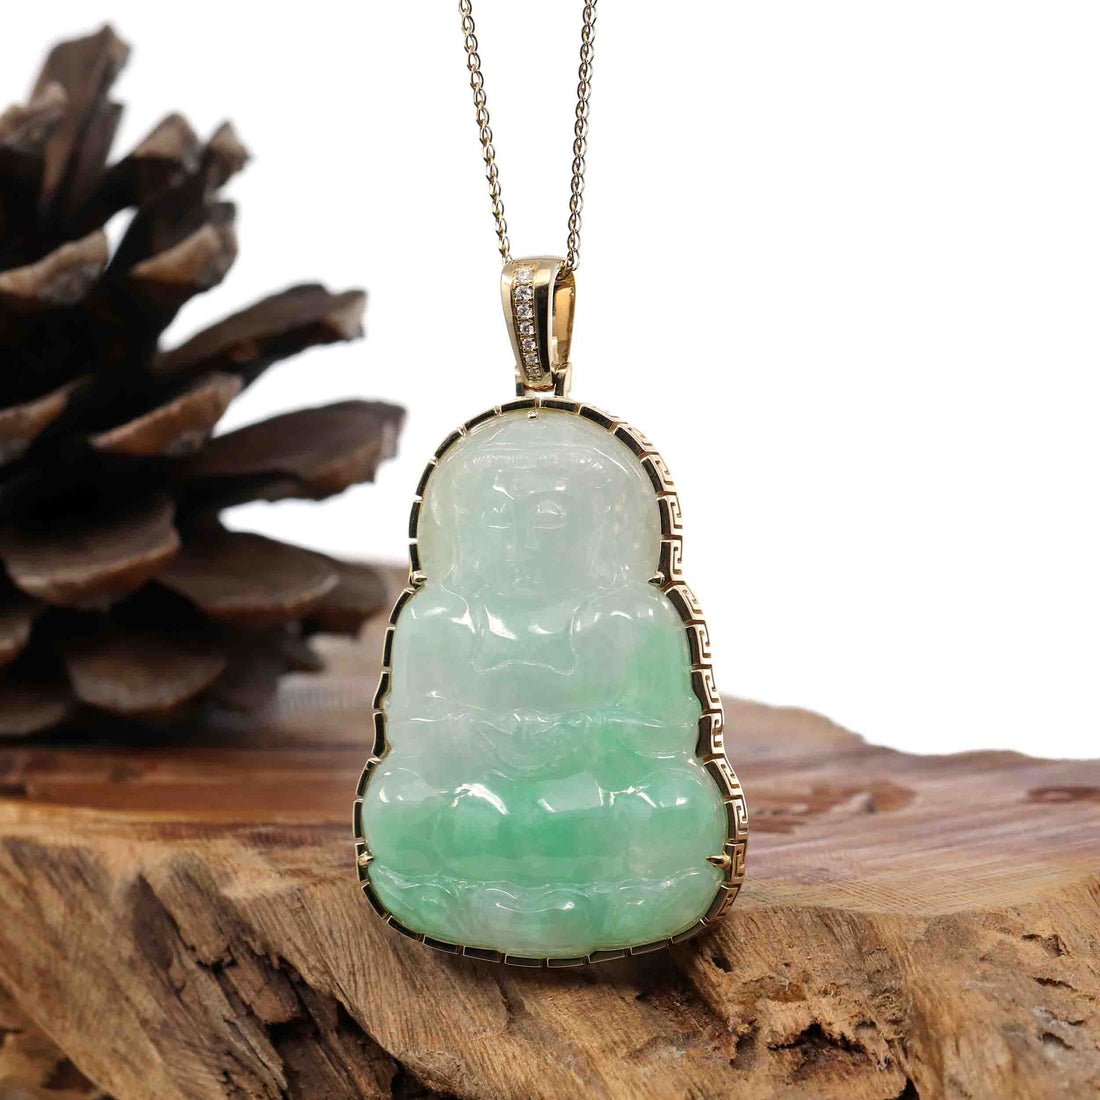 Baikalla Jewelry Jade Guanyin Pendant Necklace Copy of "Goddess of Compassion" 18k Yellow Gold Genuine Burmese Jadeite Jade Guanyin Necklace